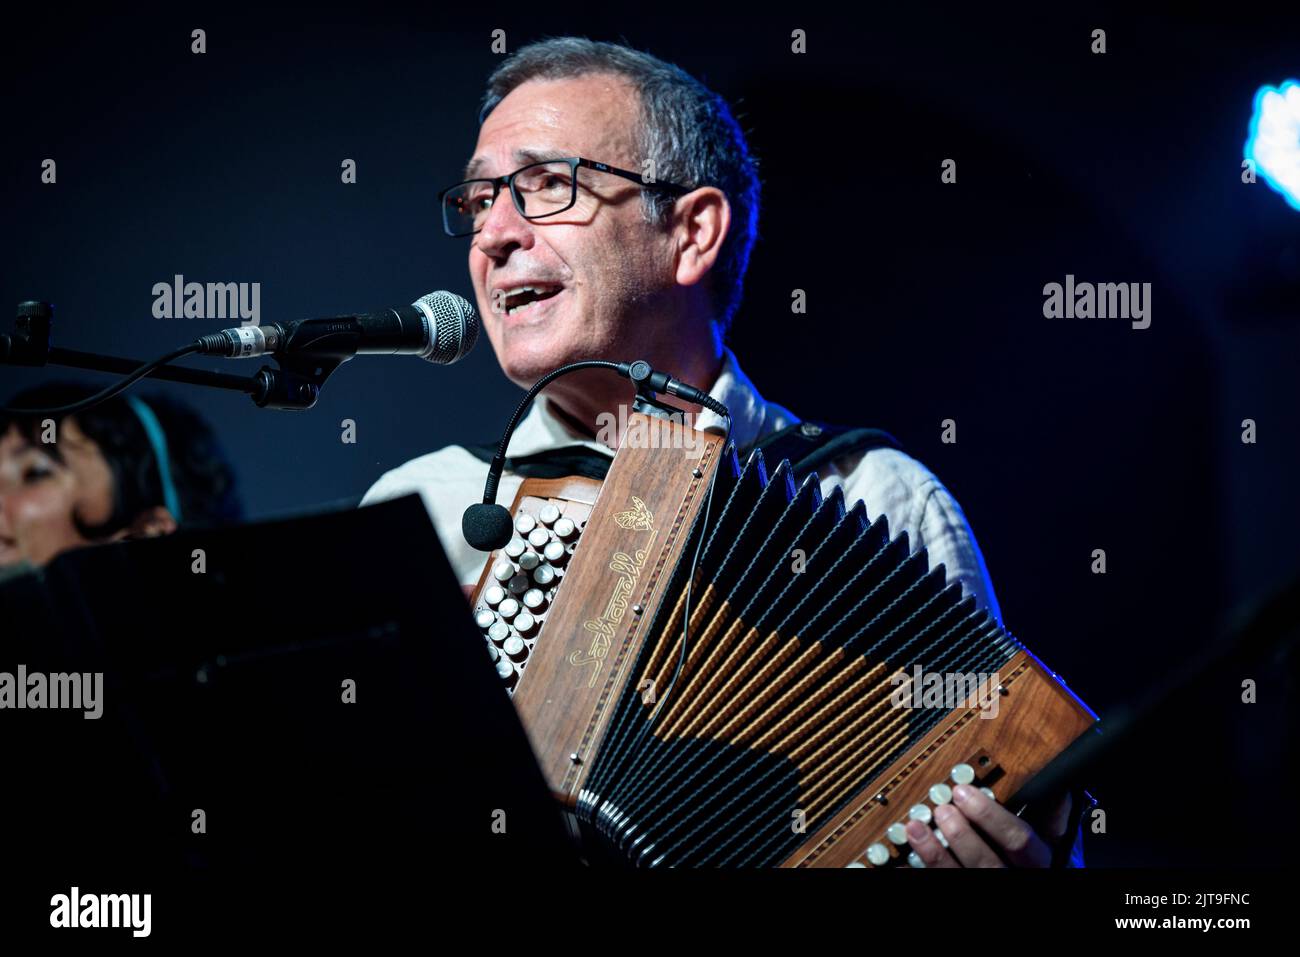 Concert by the Aranese group Sarabat, based on traditional Occitan folk music in Les (Aran Valley, Lleida, Catalonia, Spain) Stock Photo